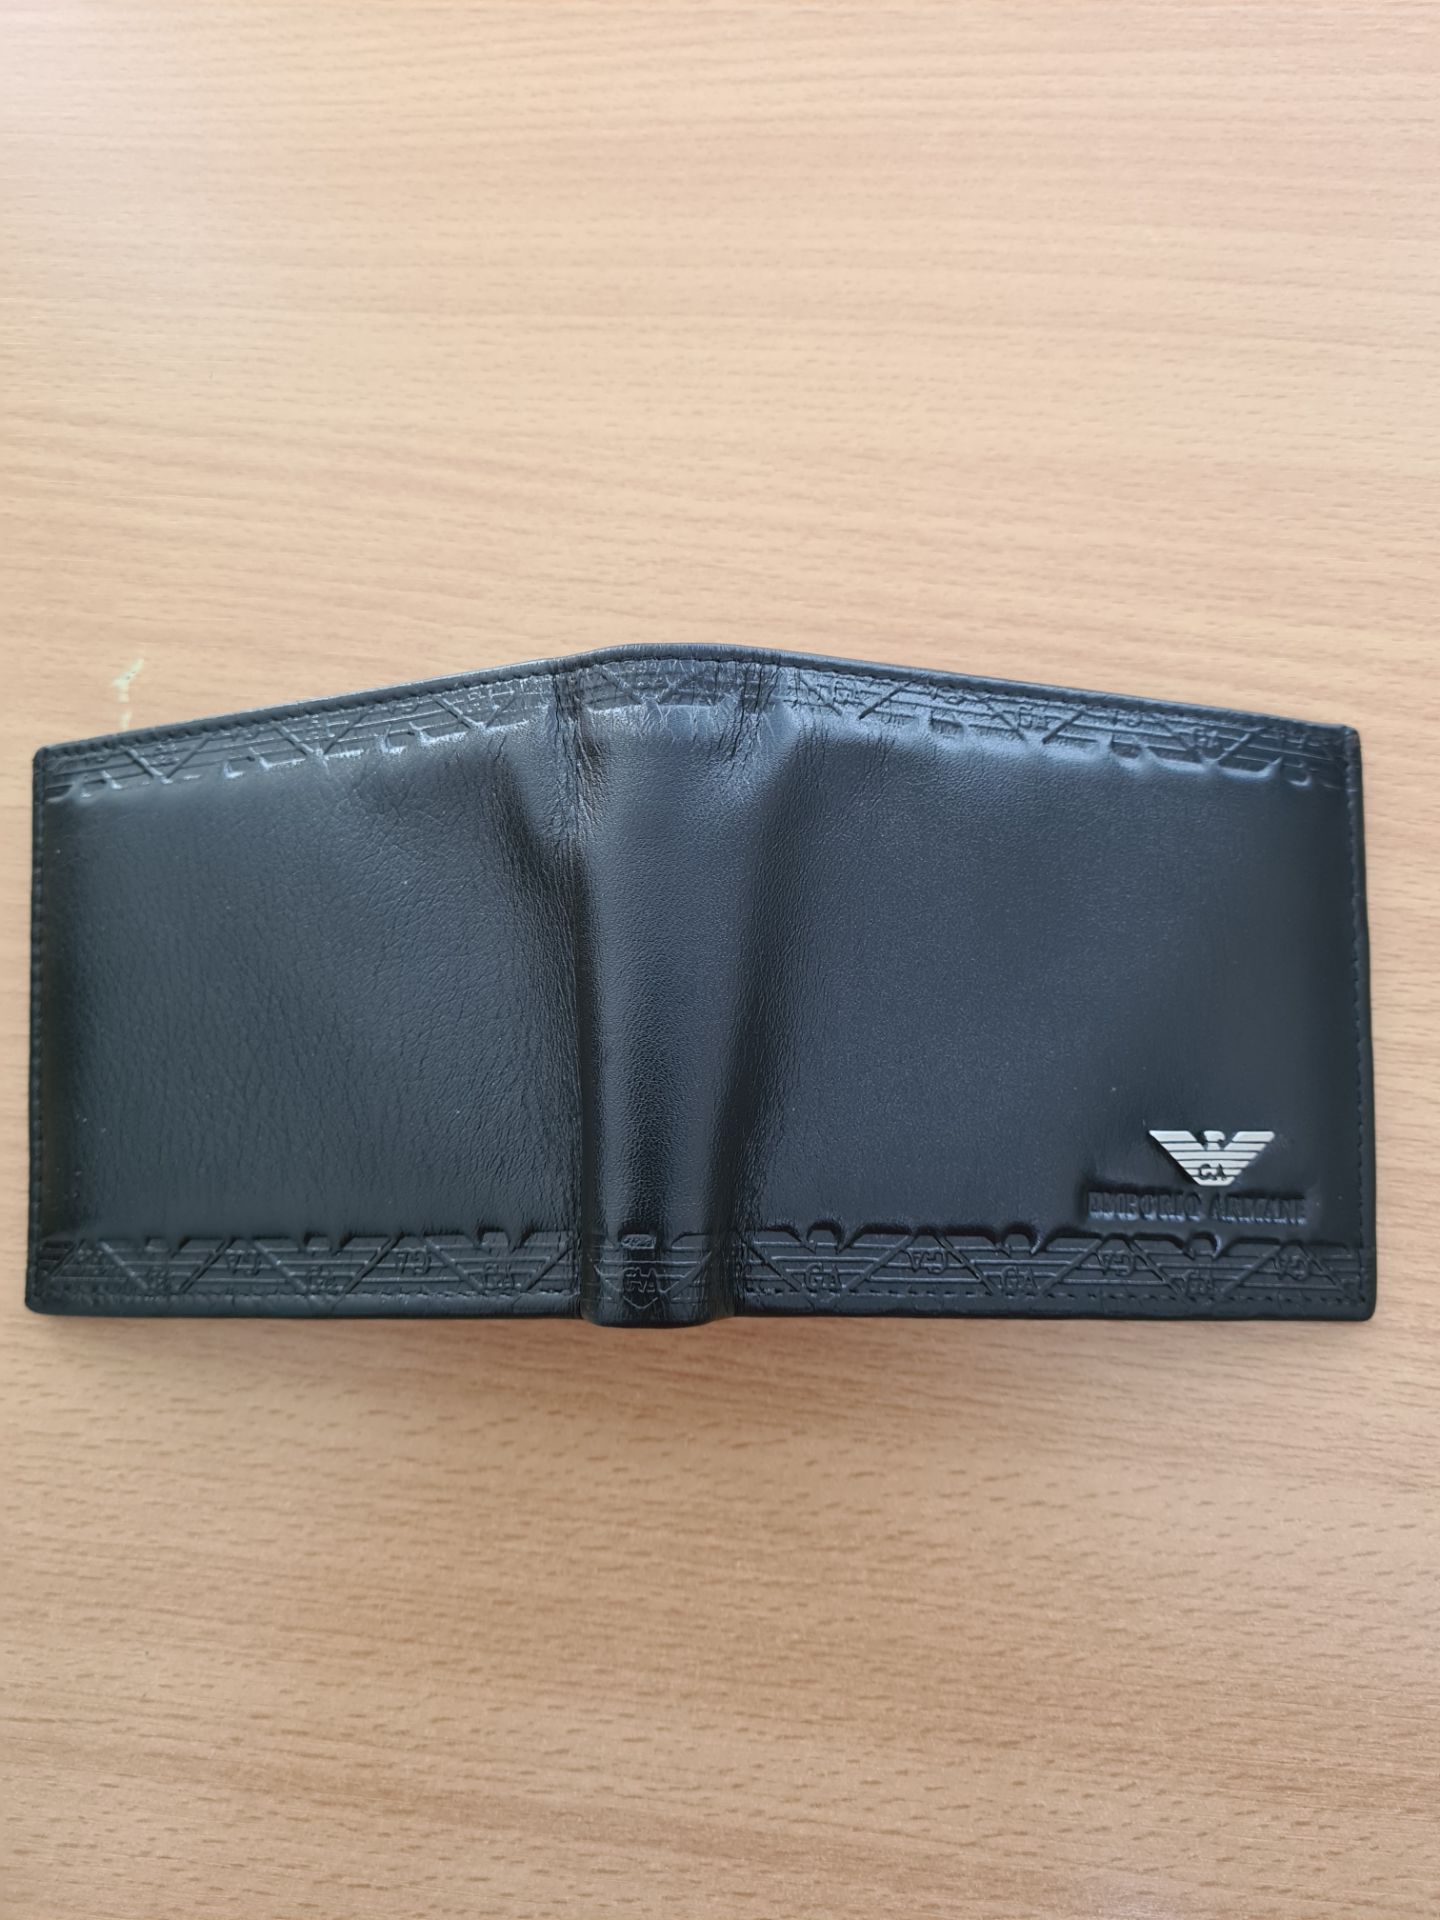 emporio armani men's leather wallet - new with box - Image 8 of 8